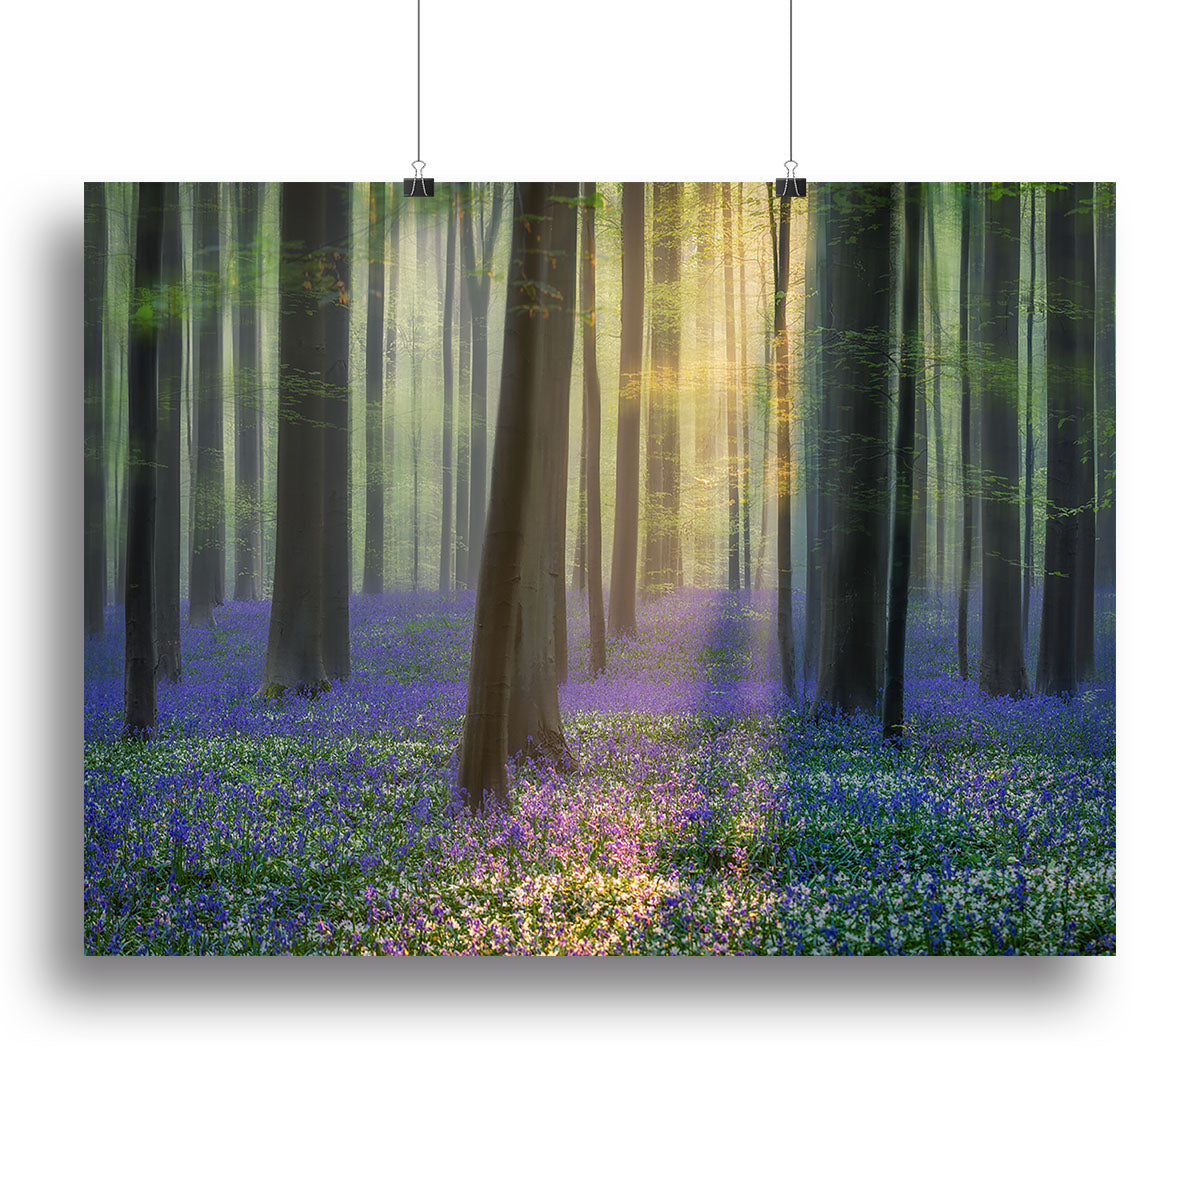 Daydreaming Of Bluebells Canvas Print or Poster - Canvas Art Rocks - 2